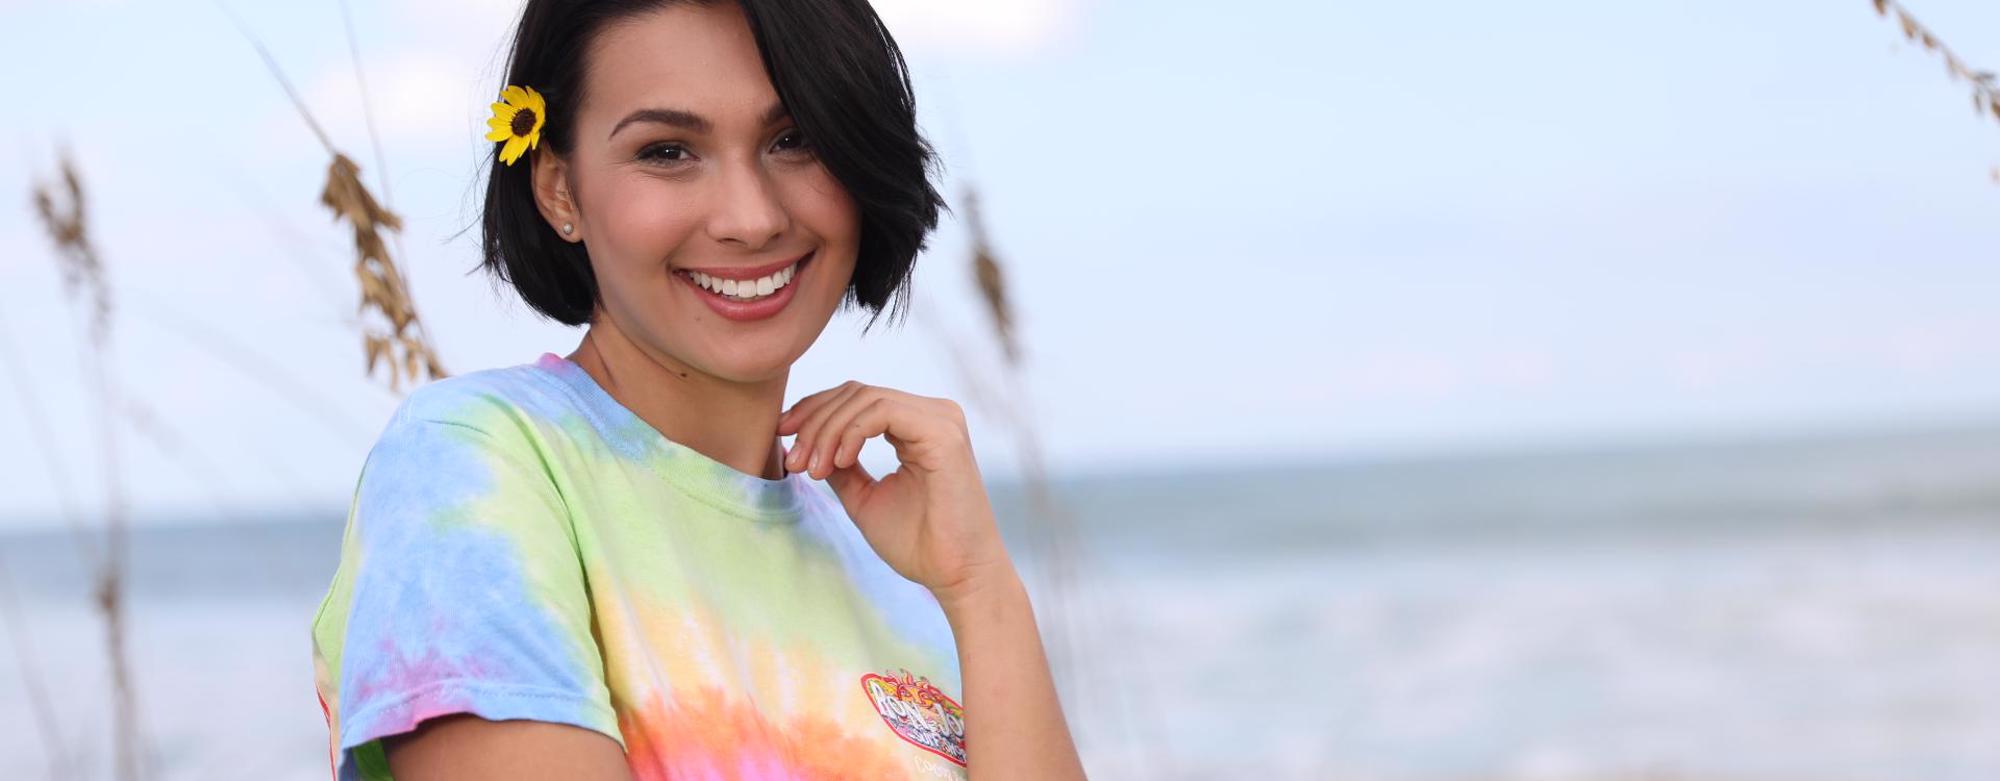 girl wearing tie-dye tee shirt with beach in background